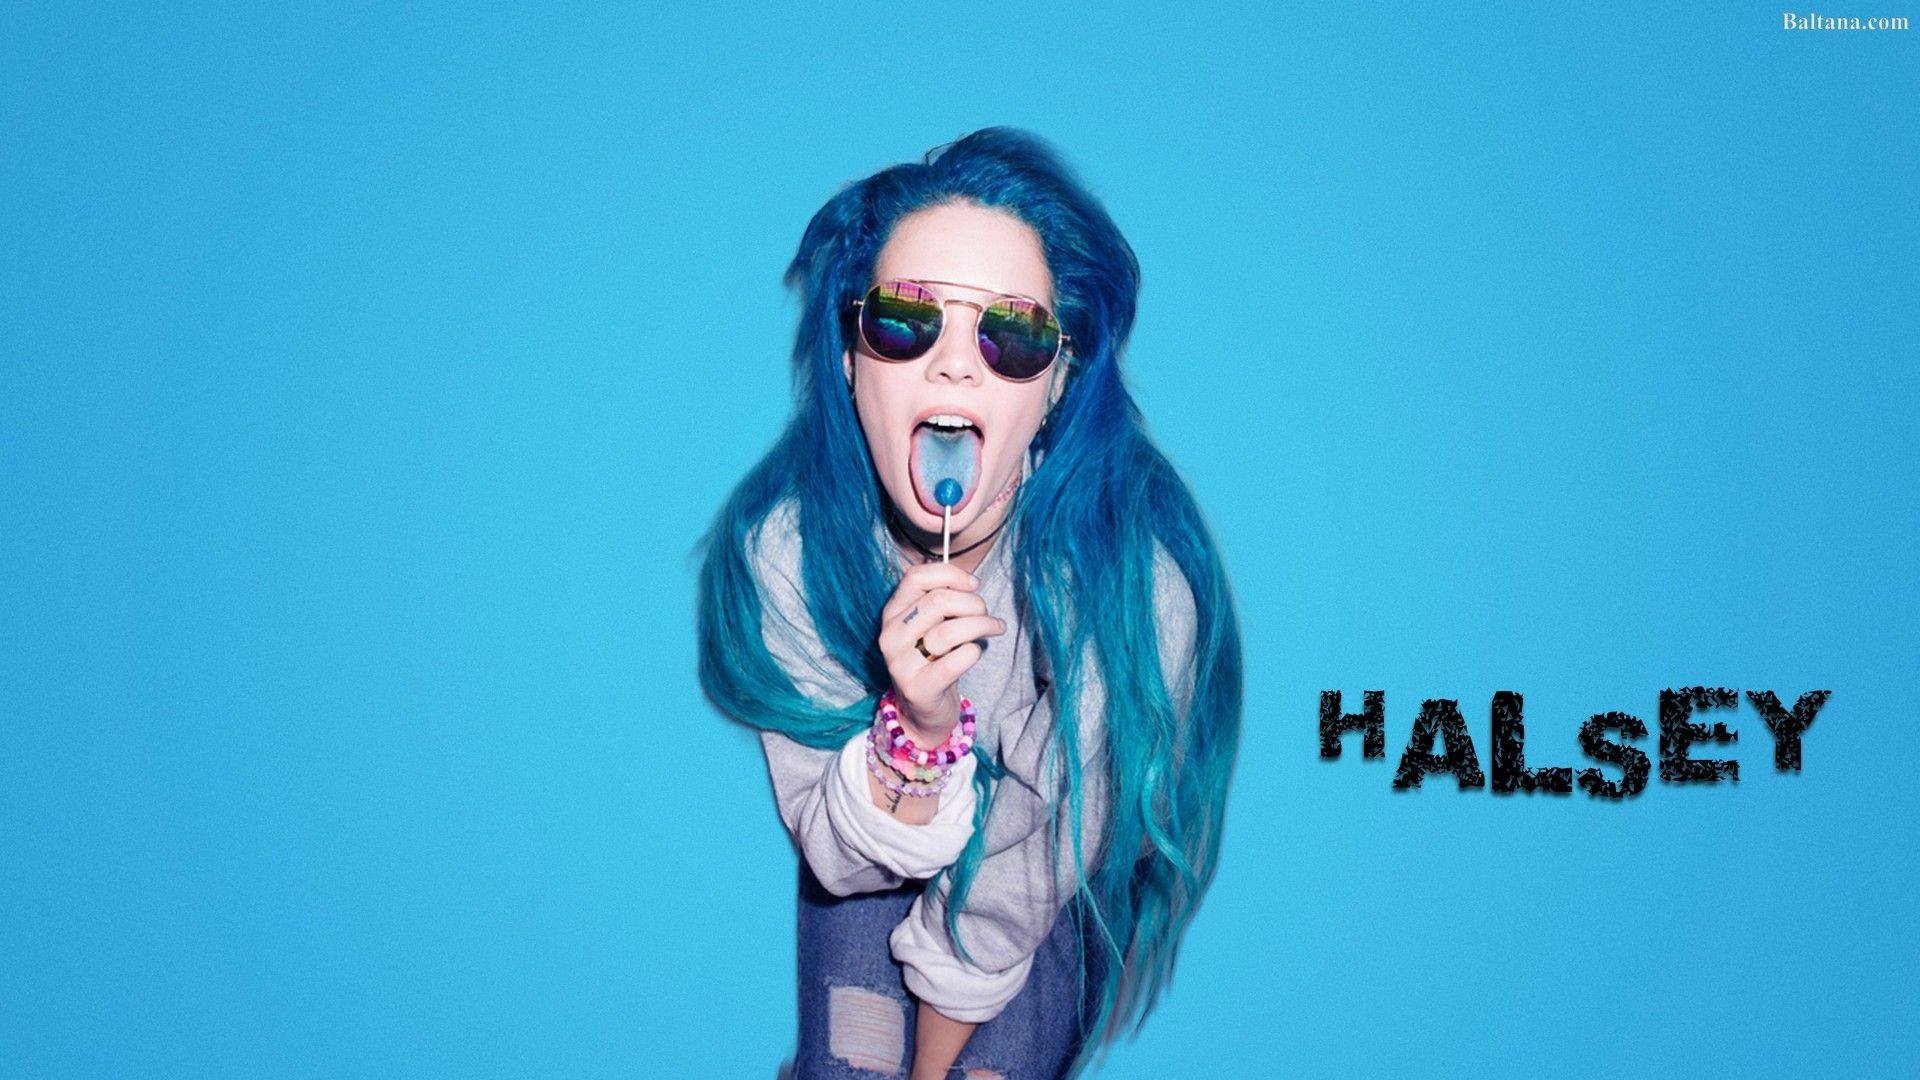 You can also upload and share your favorite Halsey 2019 wallpapers. 